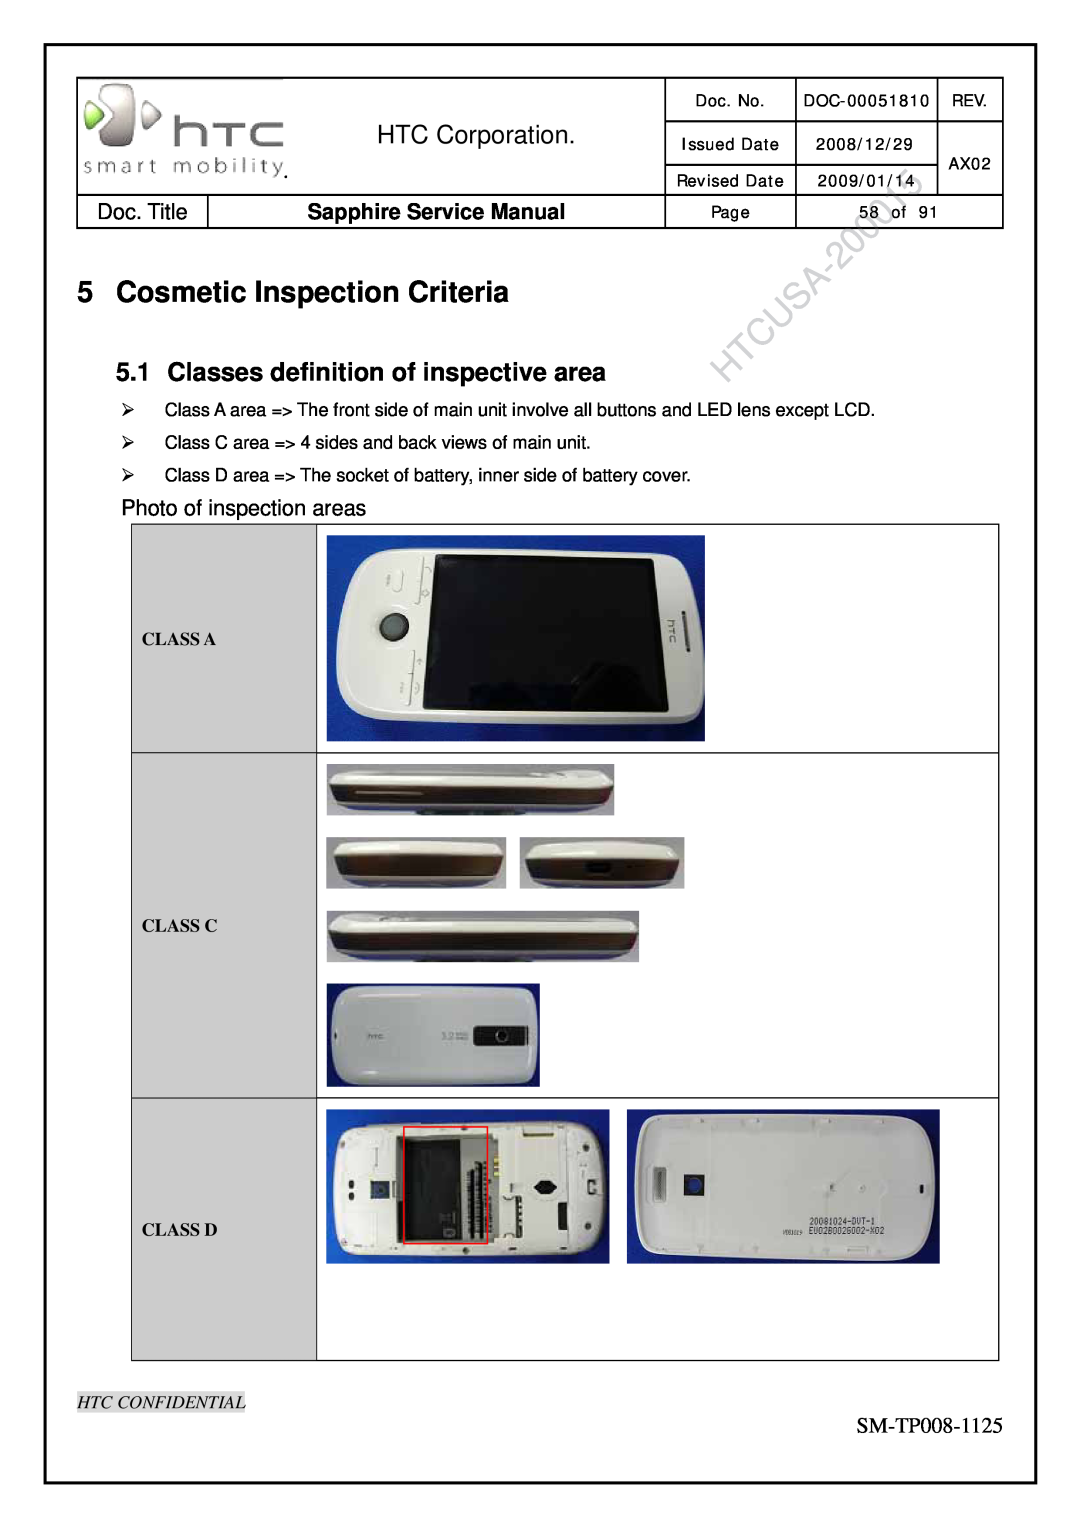 HTC SM-TP008-1125 Cosmetic Inspection Criteria, Classes definition of inspective area, HTC Corporation, Htc Confidential 